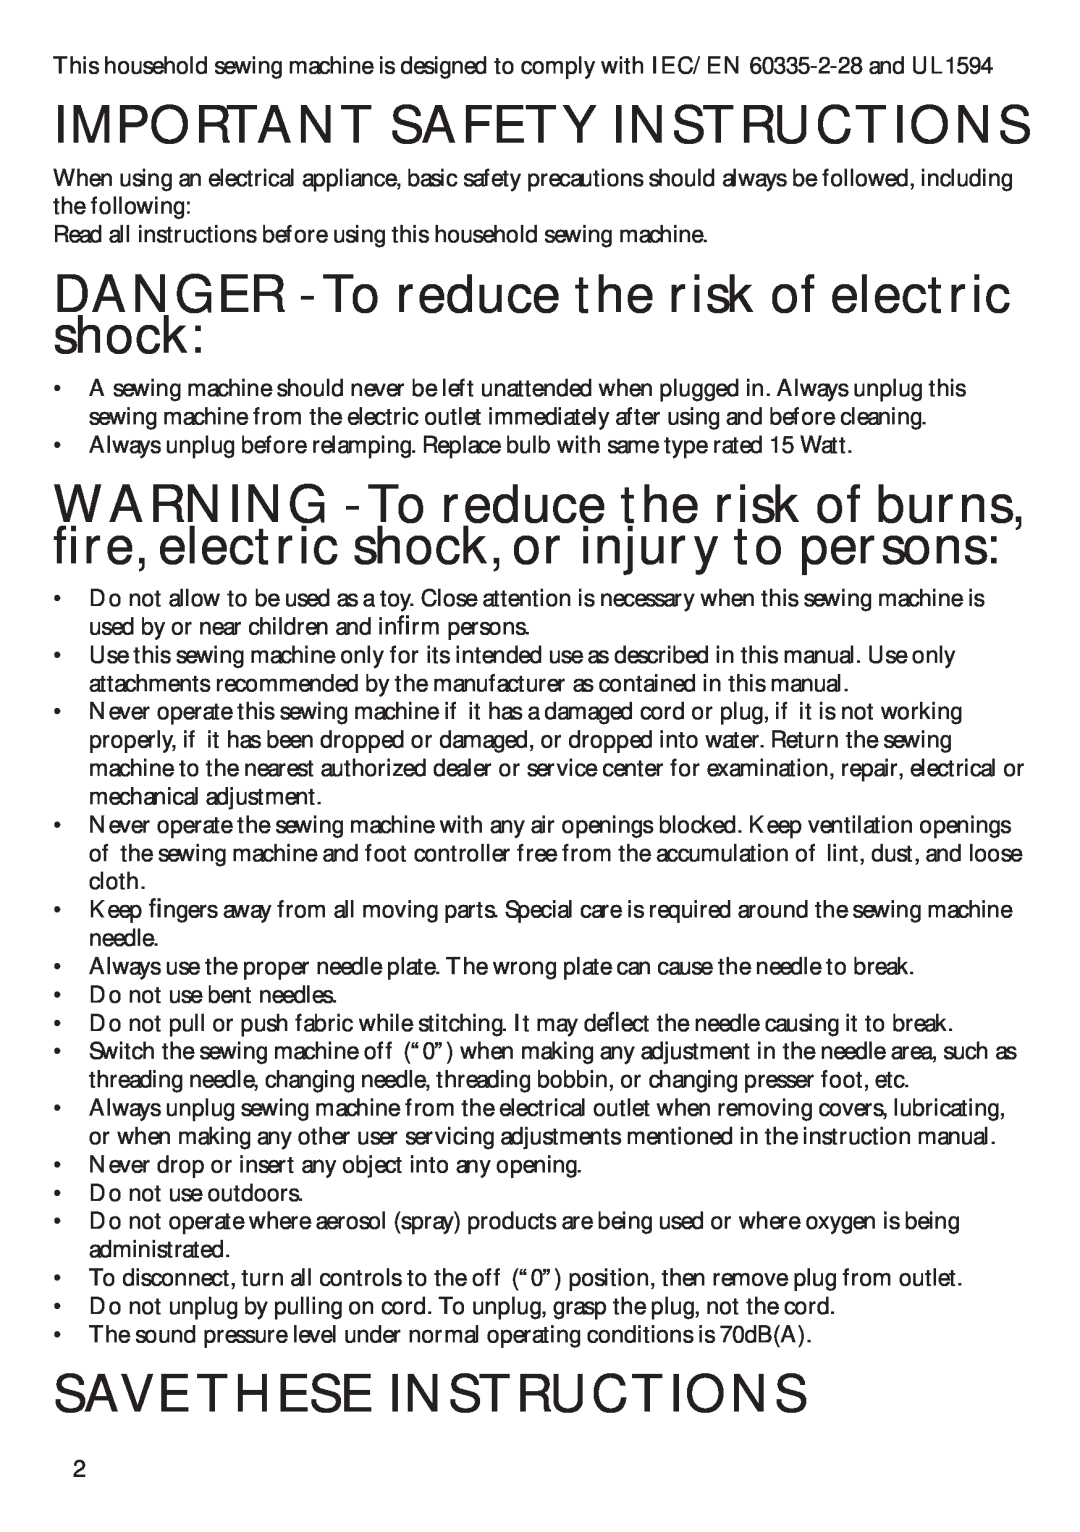 Pfaff 350P Important Safety Instructions, DANGER - To reduce the risk of electric shock, Save These Instructions 